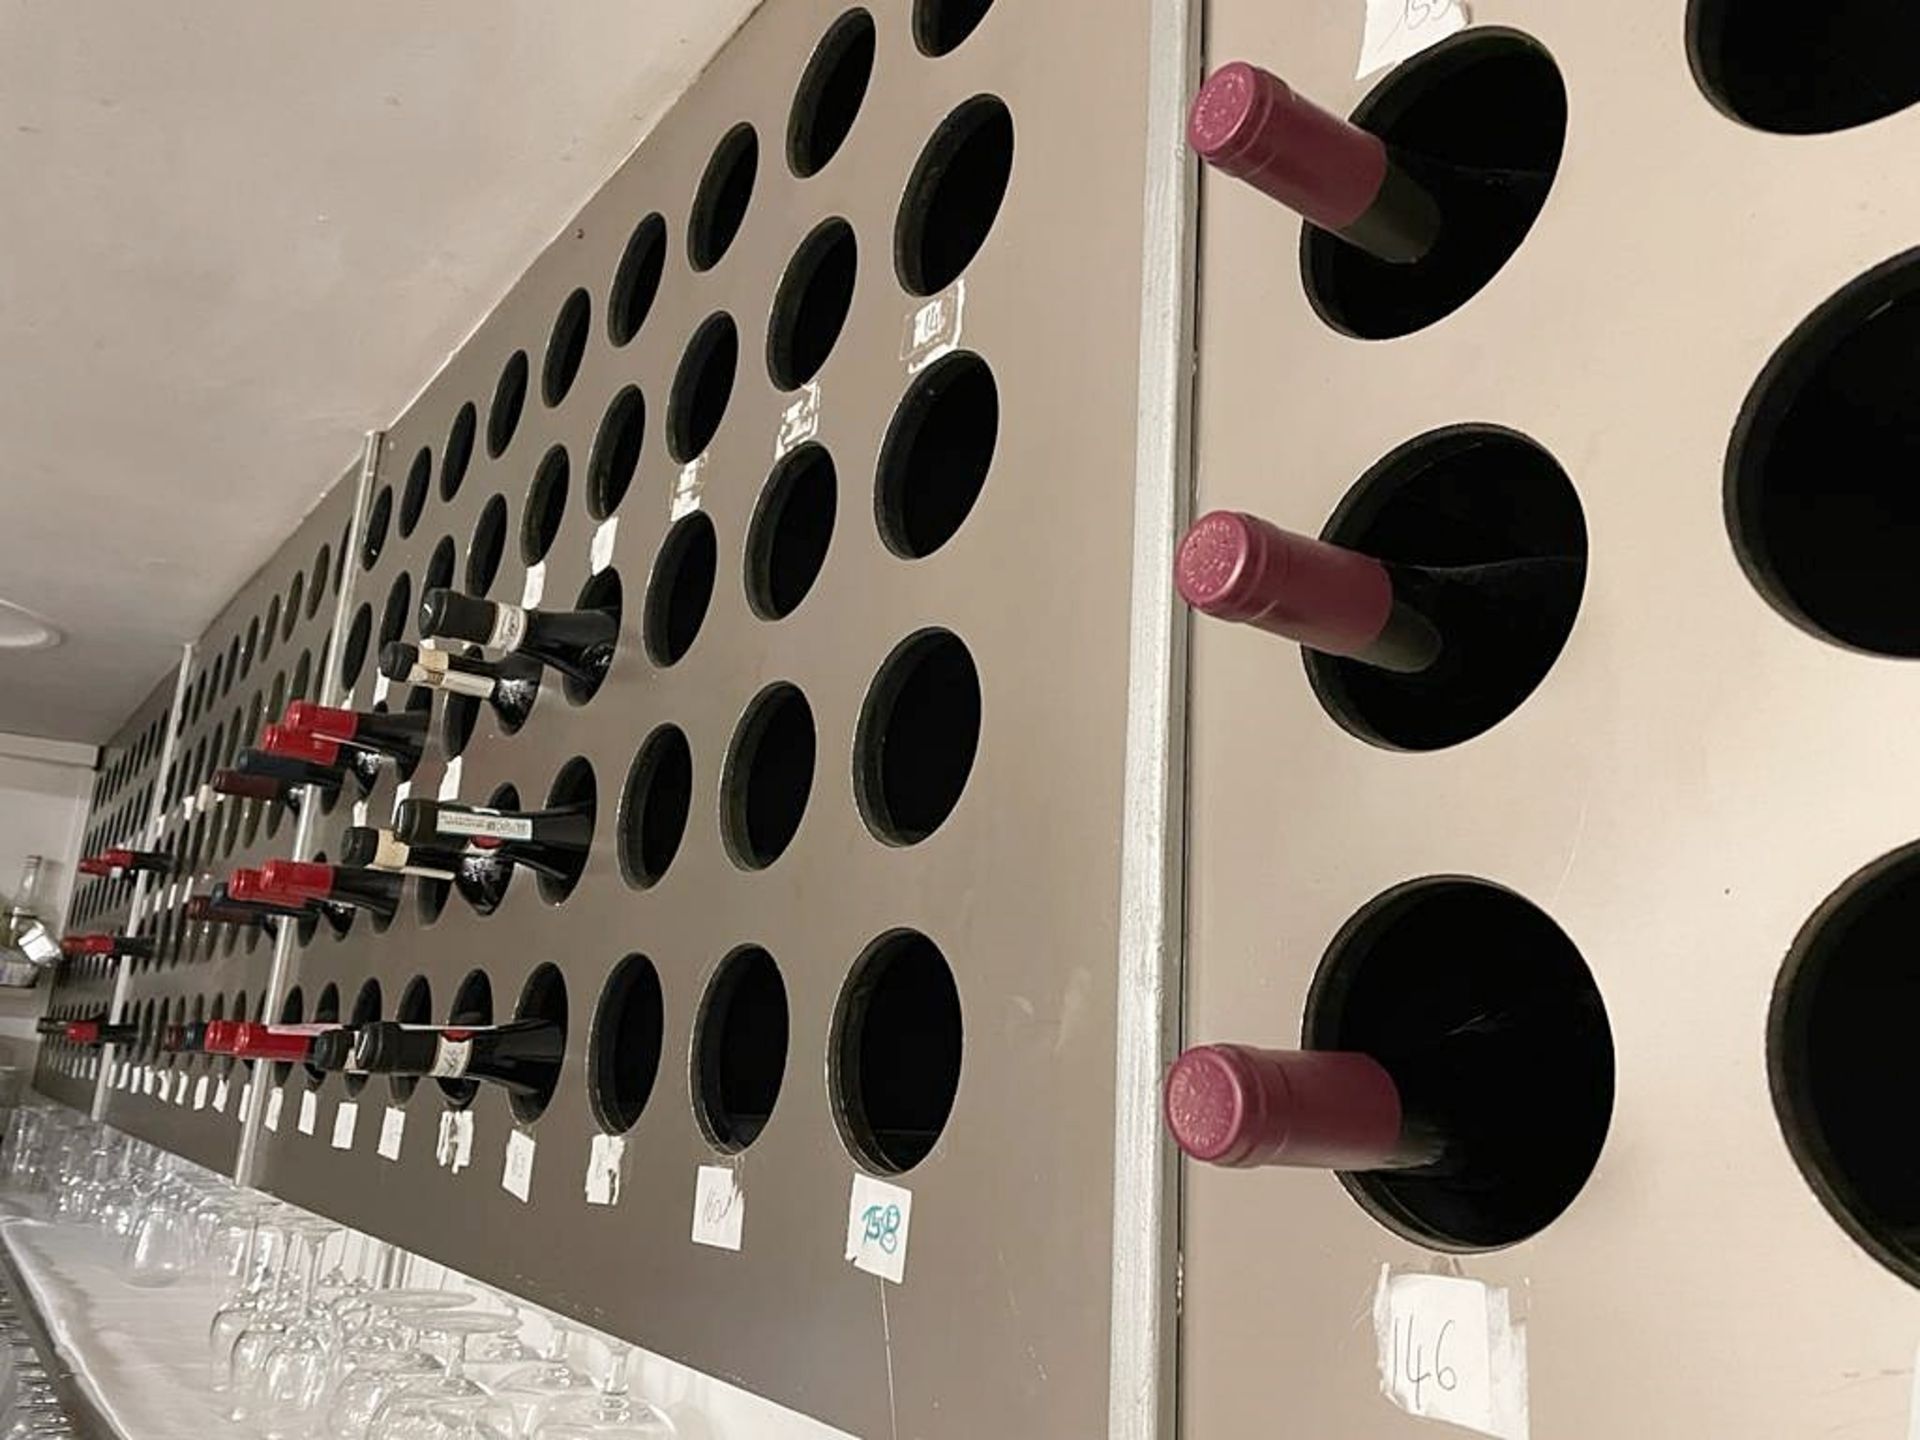 1 x Wall Mounted Wine Rack For 150 Bottles, Supplied In 4 Sections - Dimensions: W440cm x H84cm x - Image 2 of 4